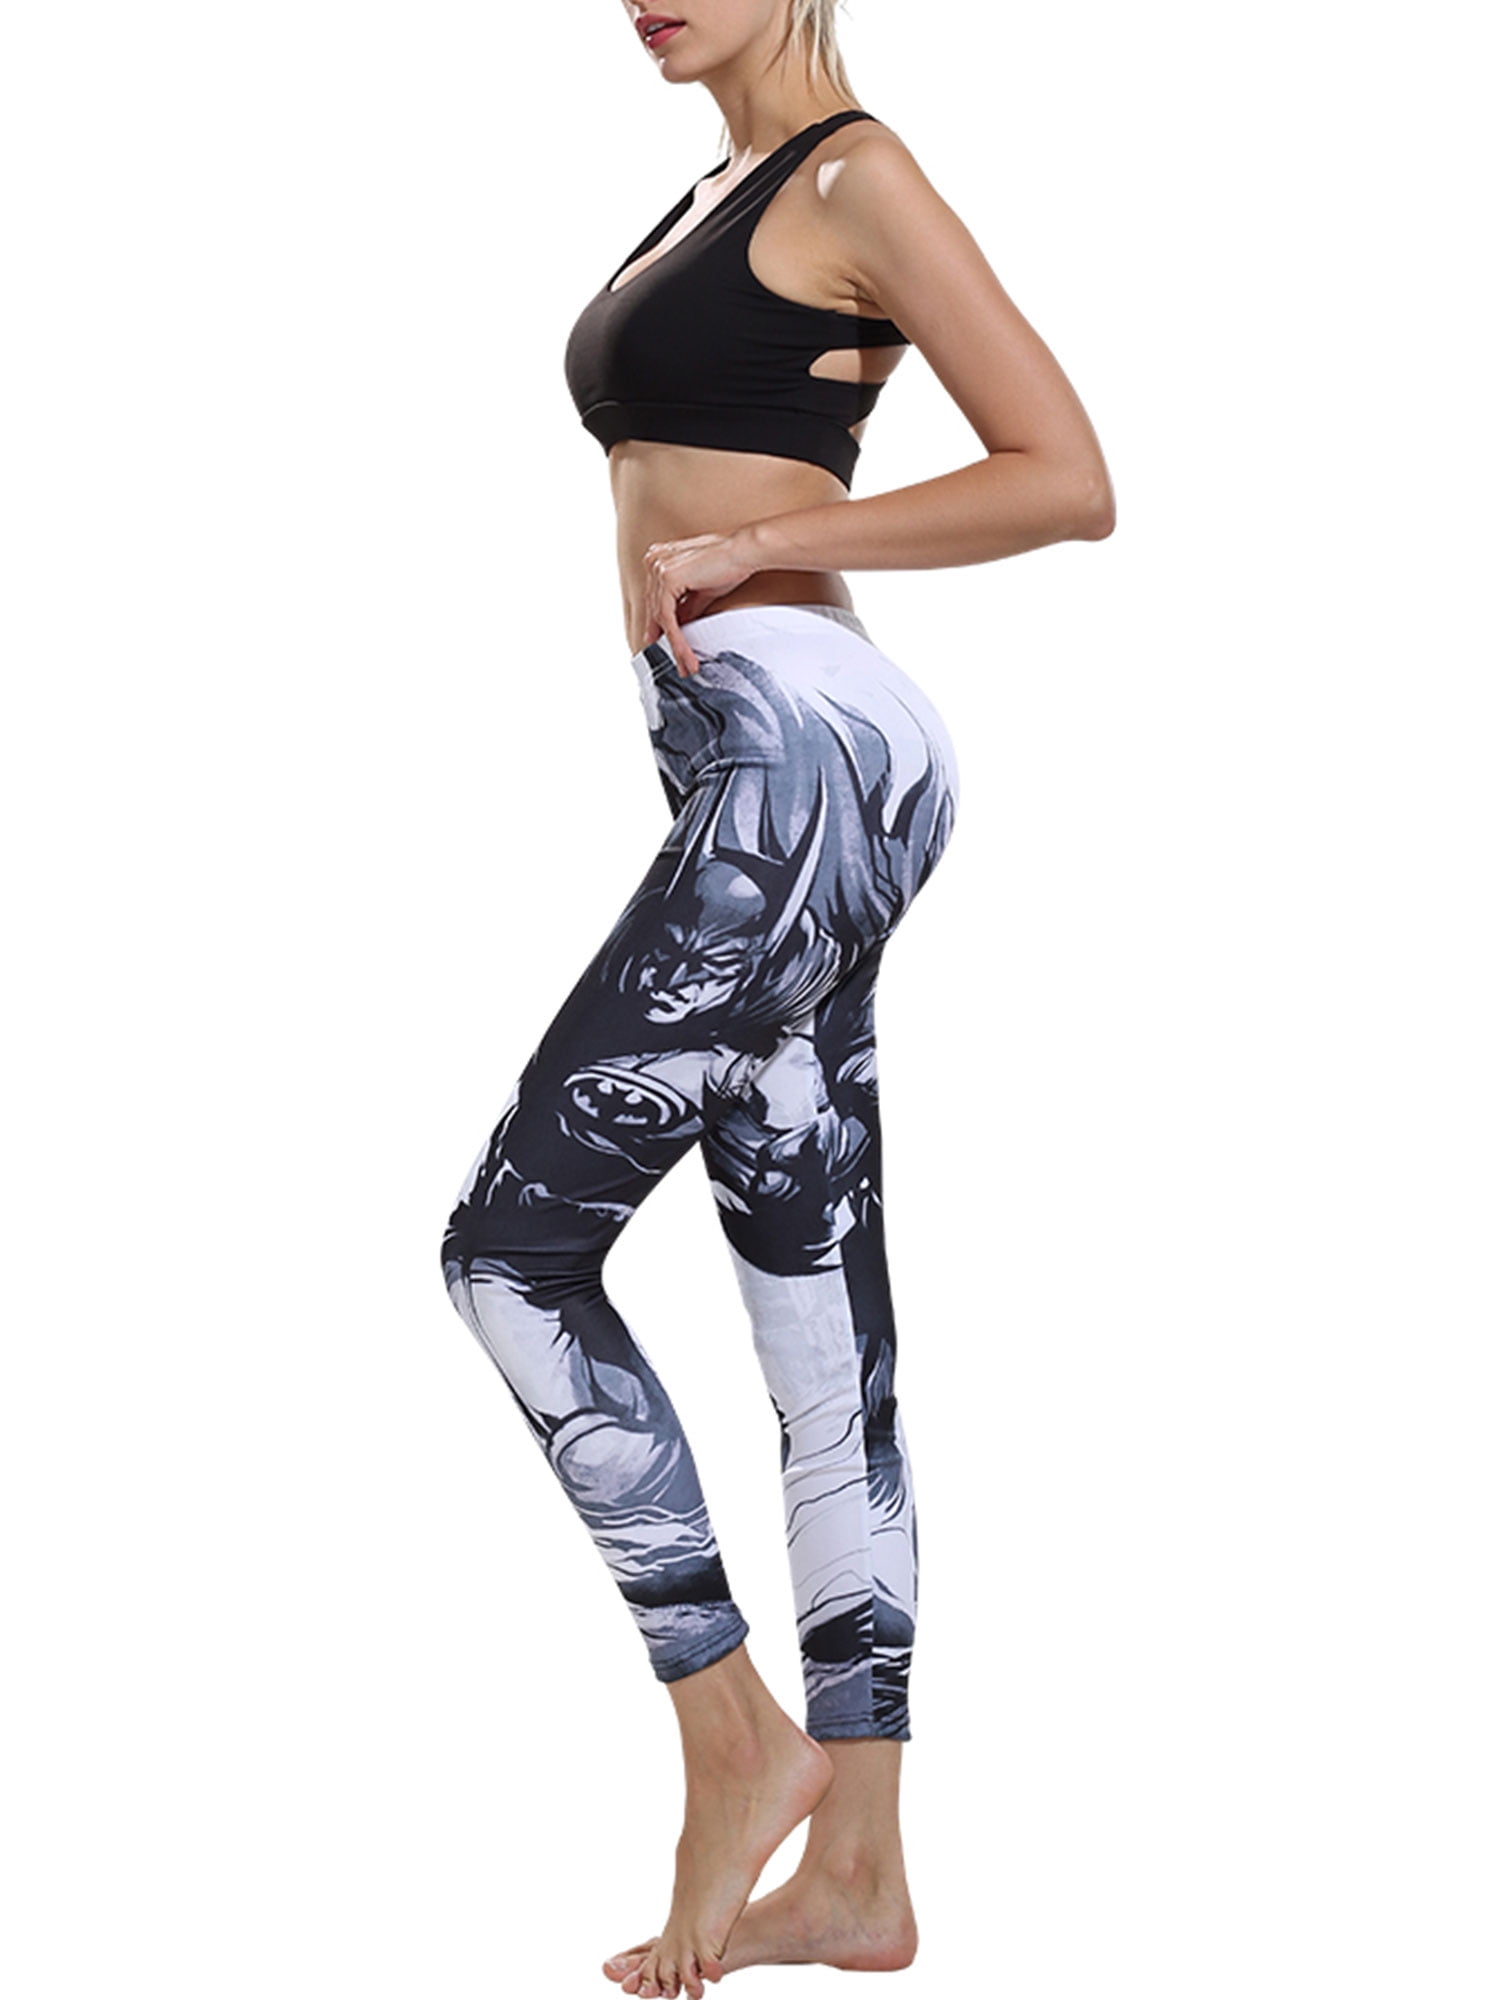 Women Yoga Leggings Fitness Gym Exercise Running Jogging Pants Stretch Trousers 